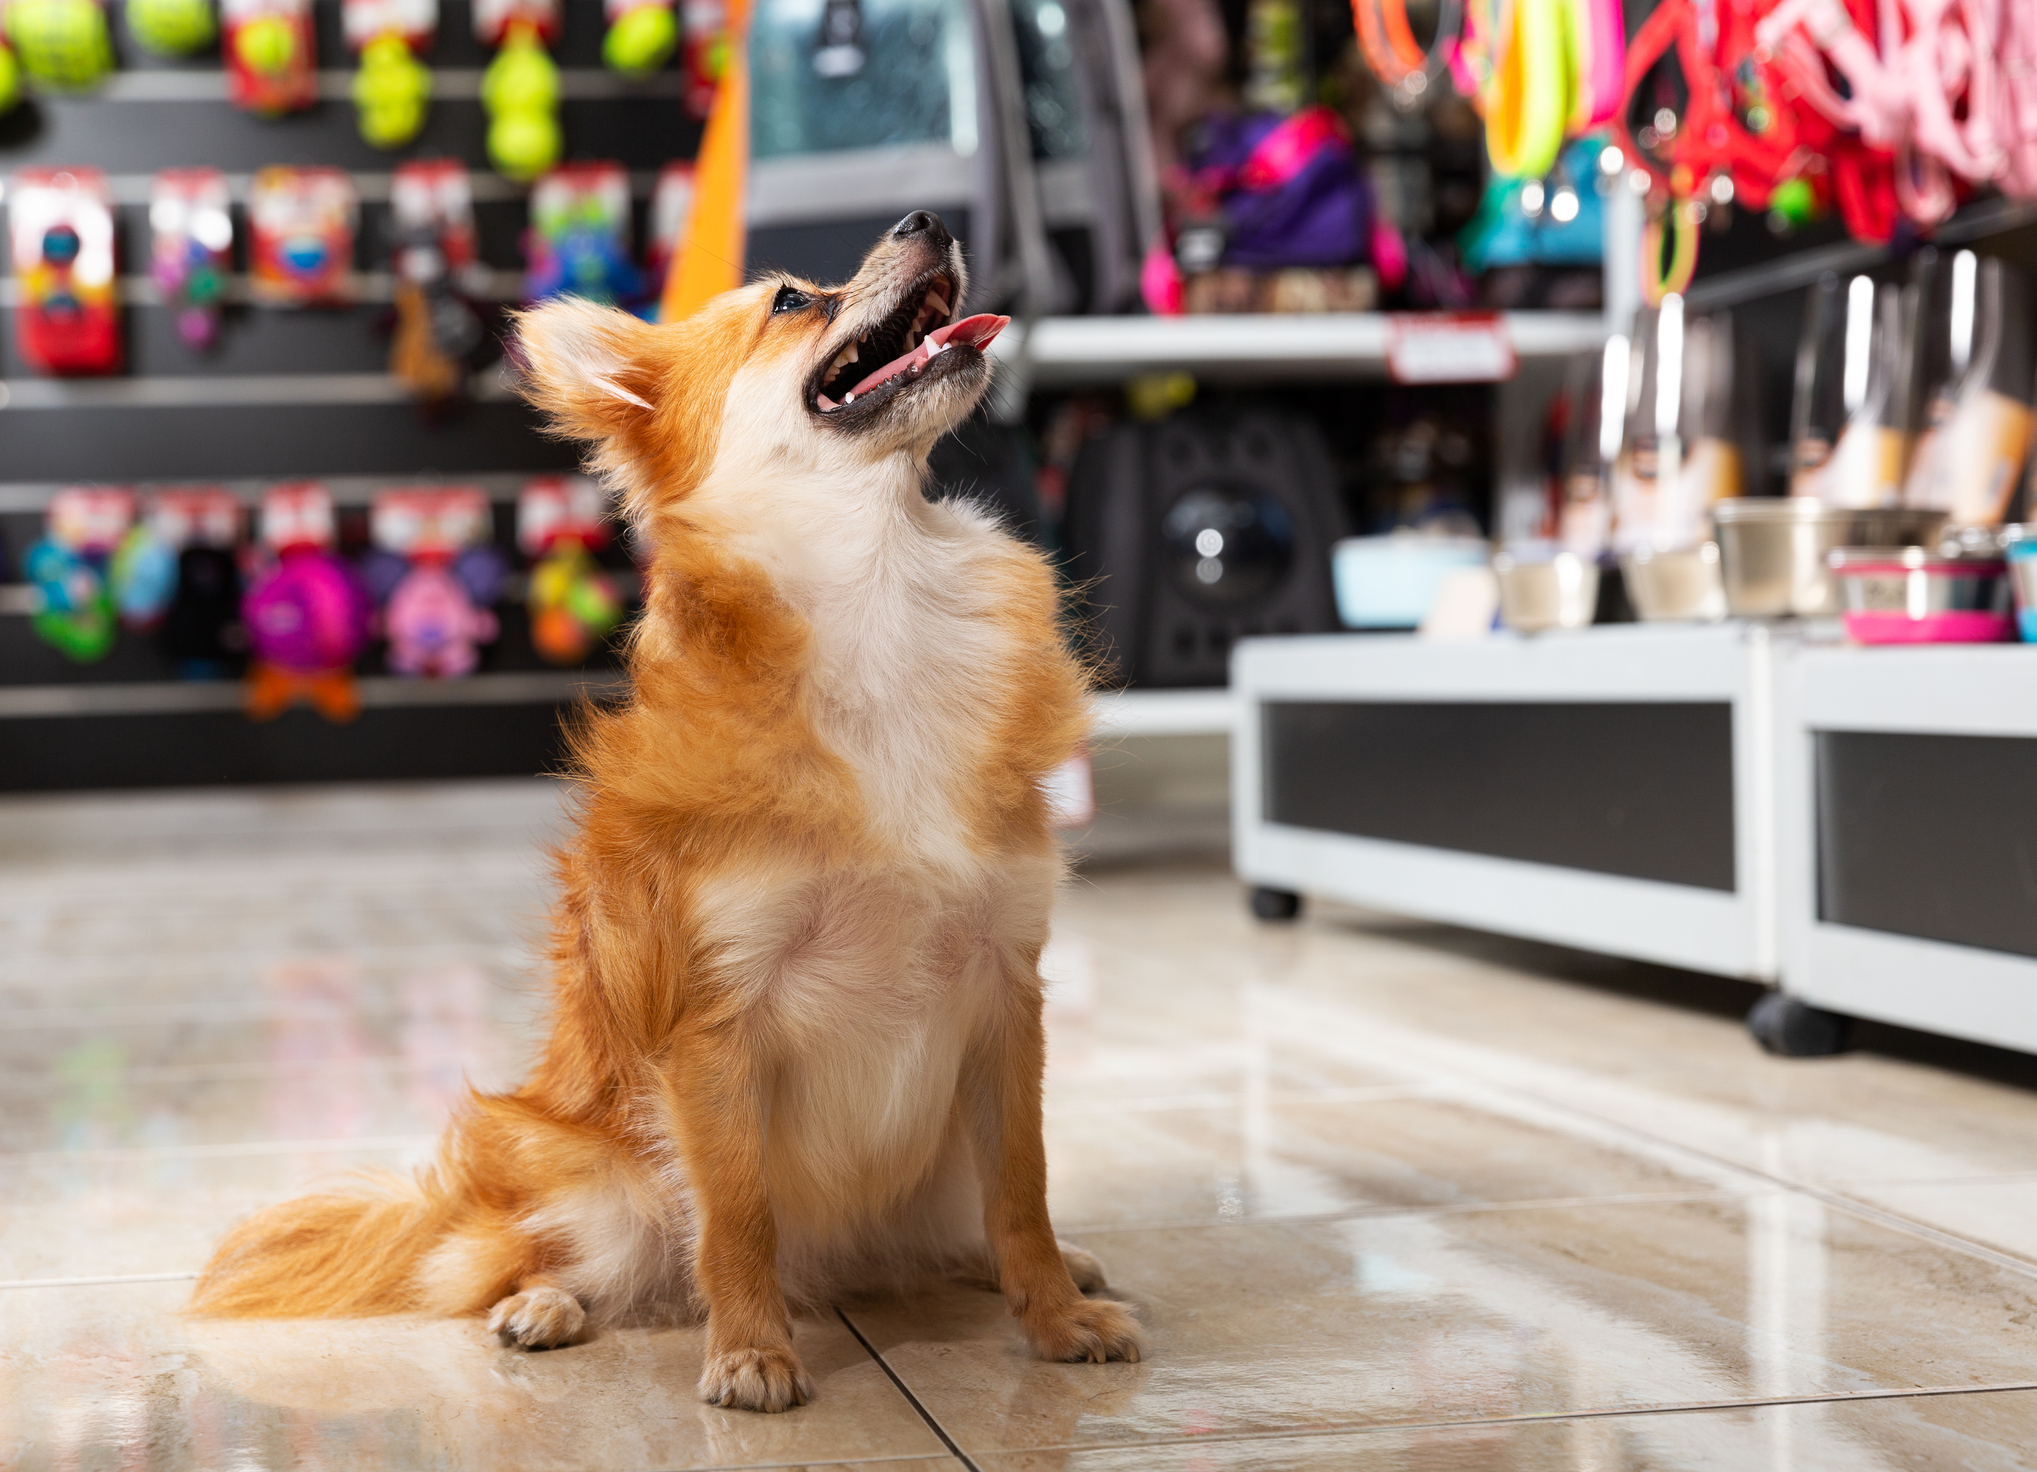 Spoil Your Pets at the Top Freeport Pet Store in Woodshore Marketplace